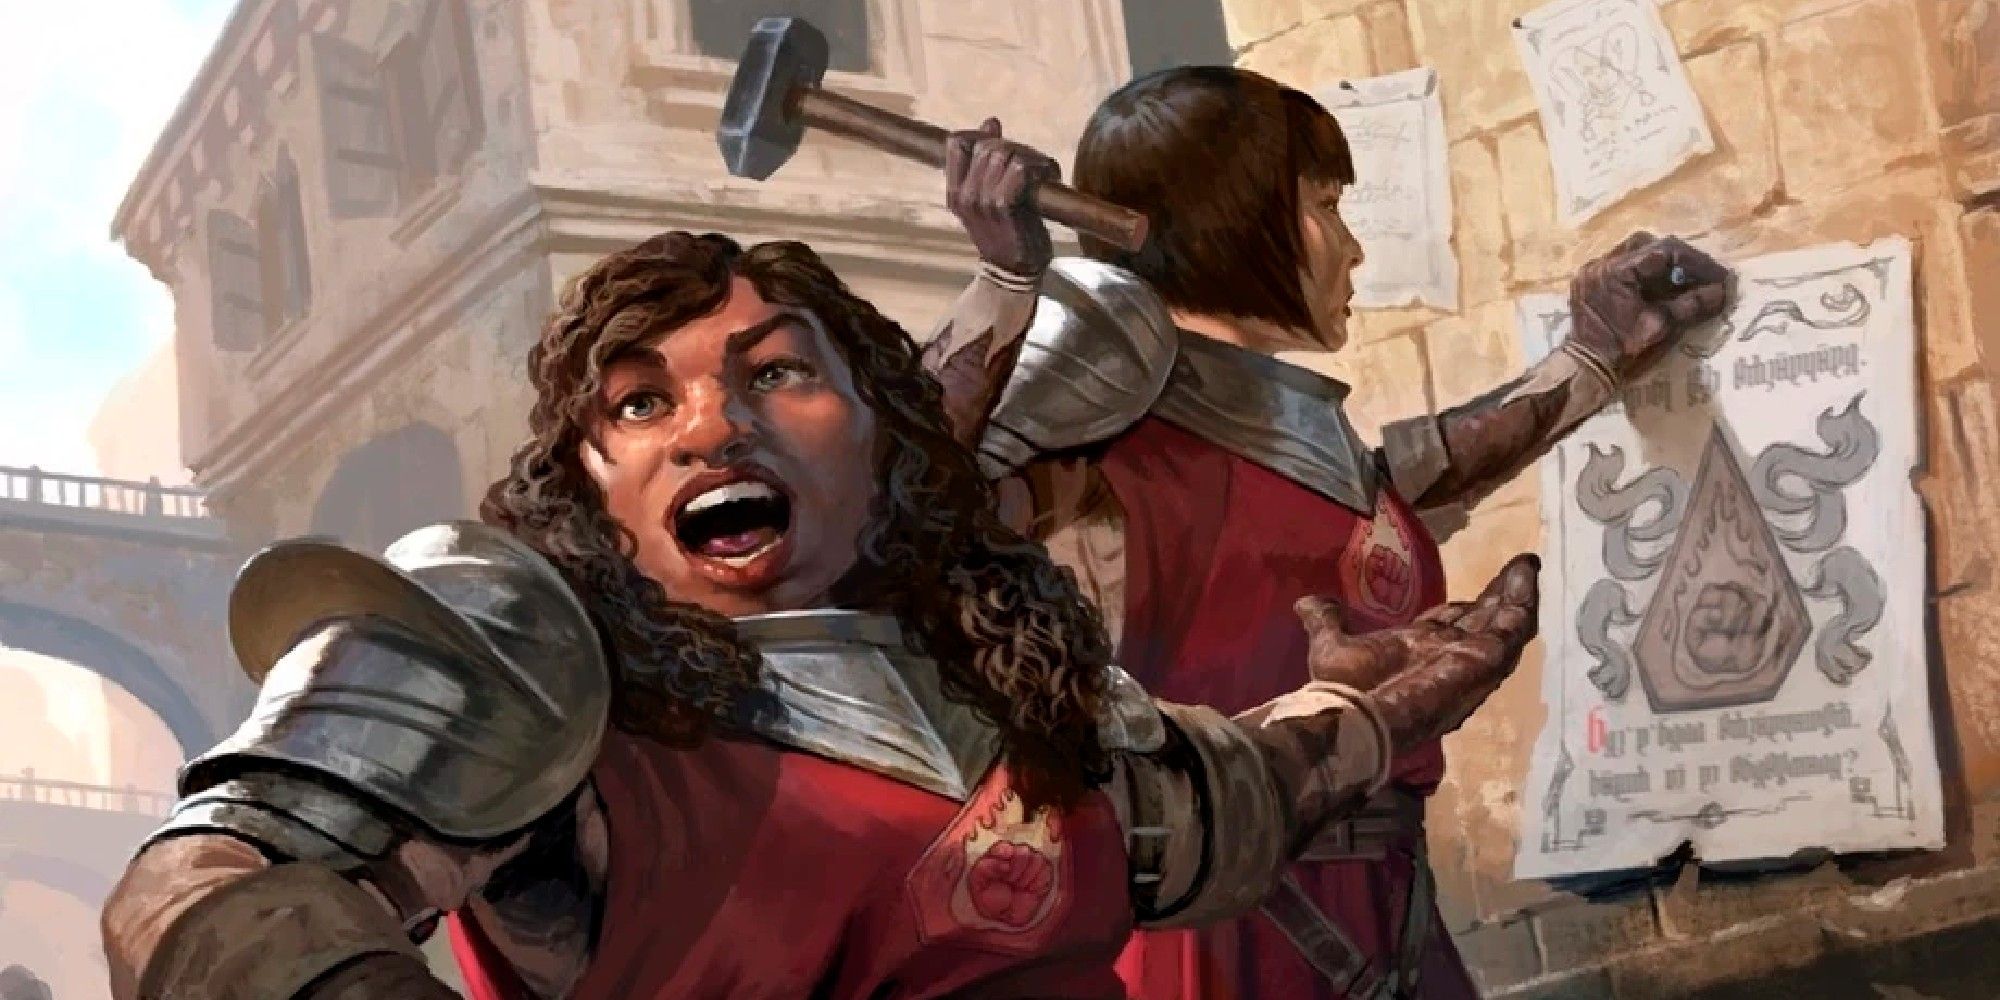 Dungeons & Dragons image showing two Flaming Fist members placing recruitment posters